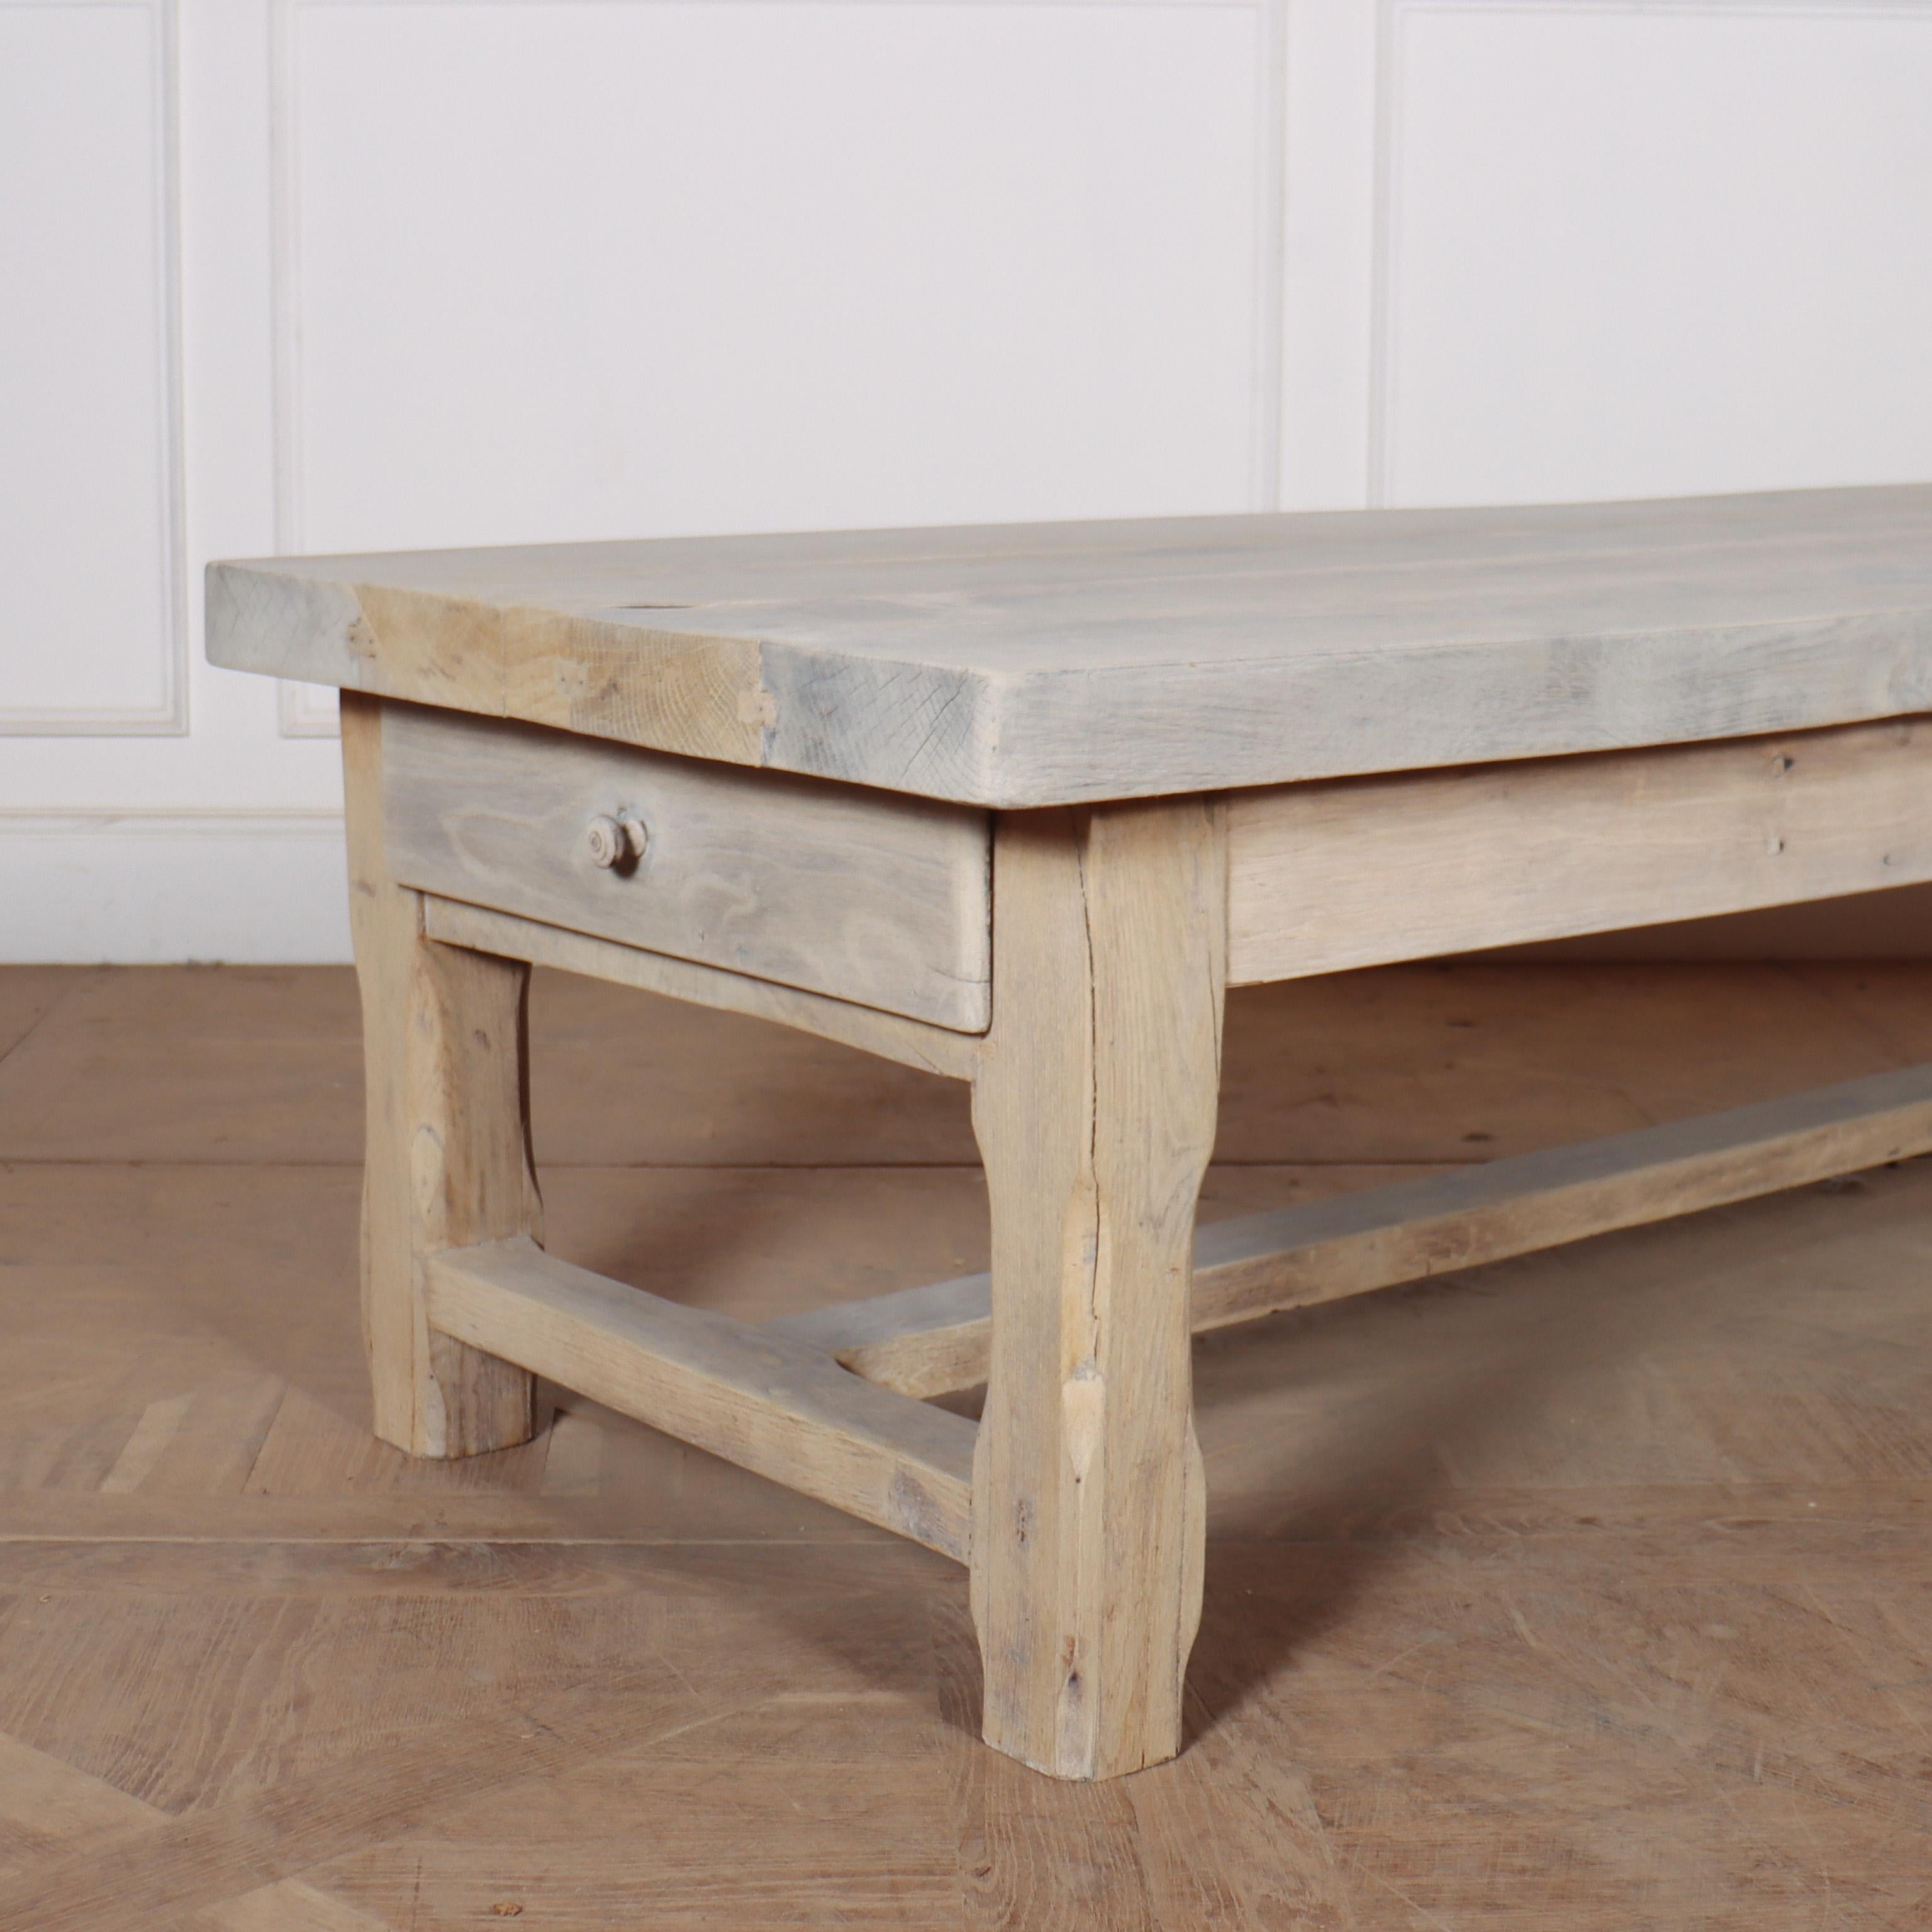 Large 19th C French bleached oak coffee table with a 2.5